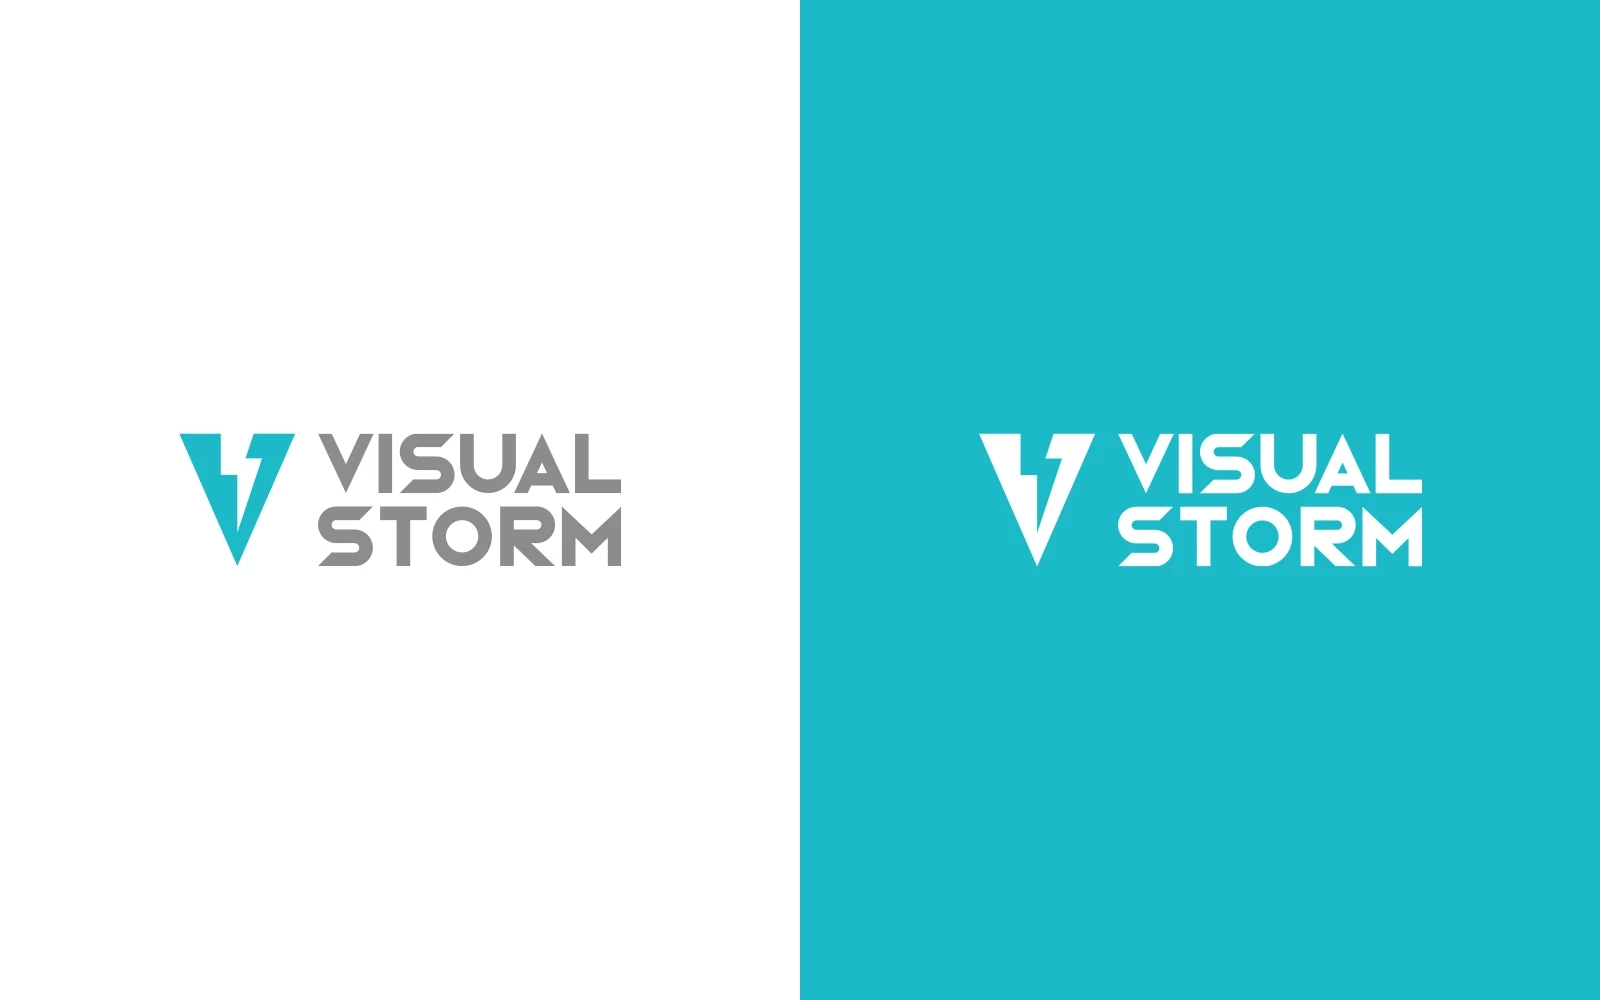 The Visual Storm logo is split into two versions one shown in colour on a white background, and the other is white on a blue background